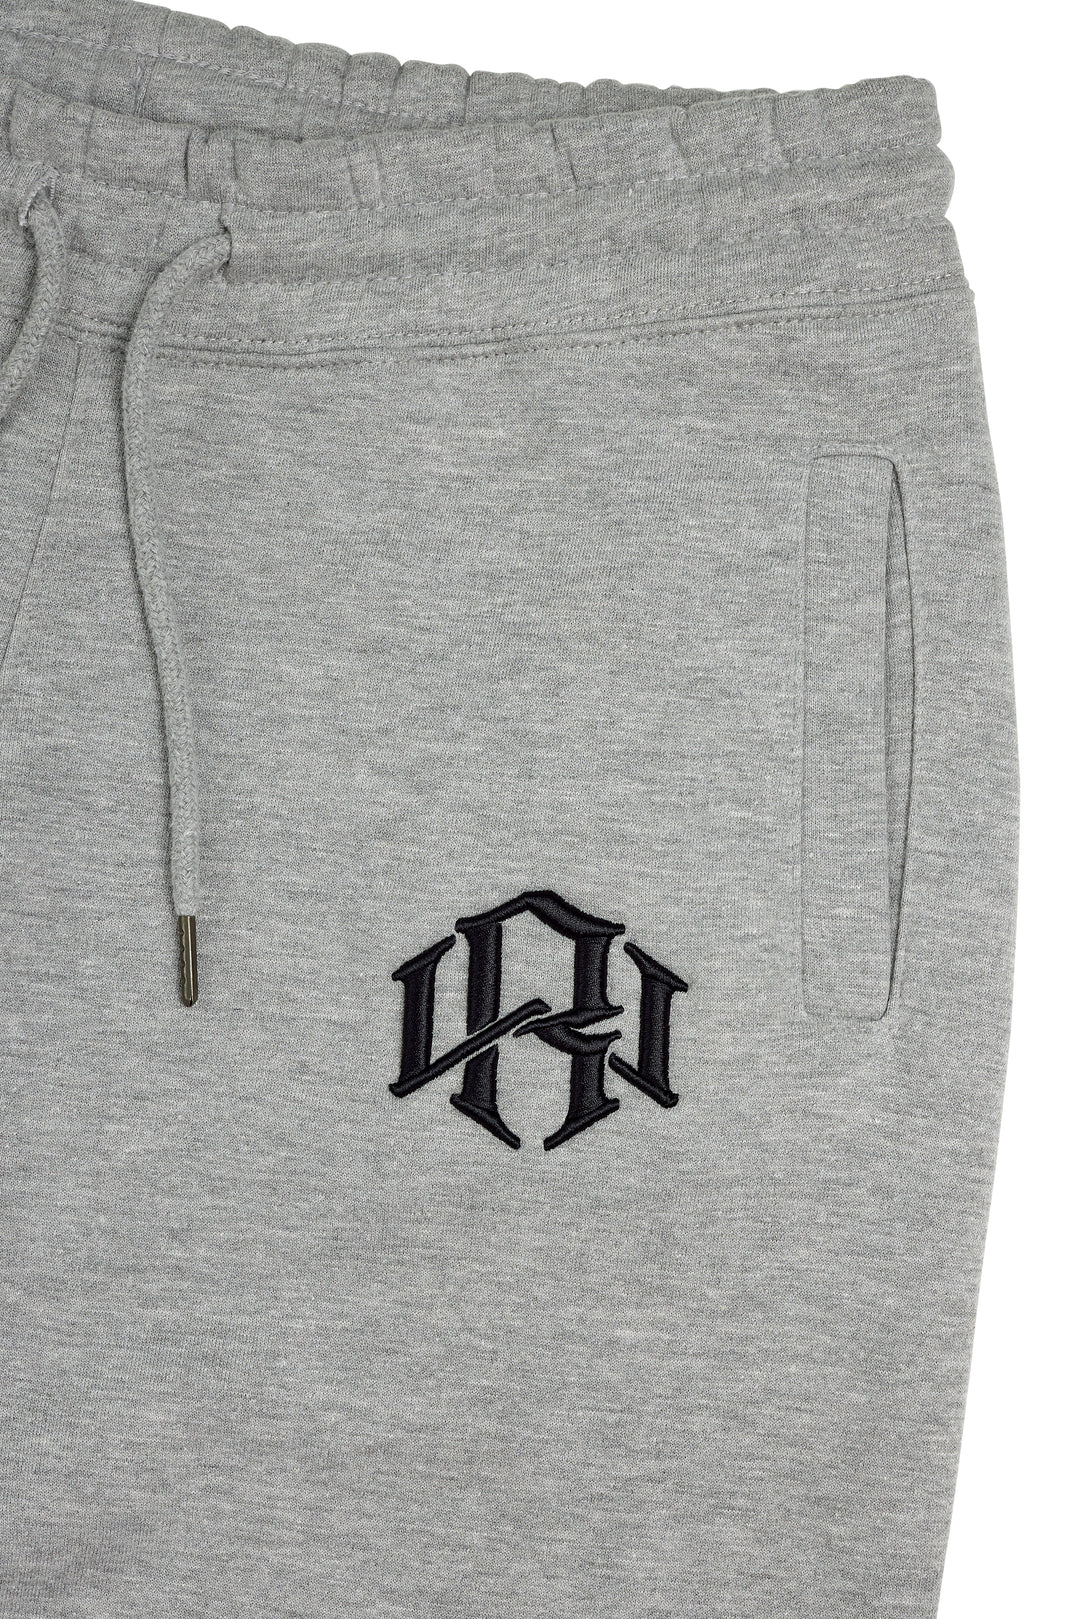 Premium Heather Grey 400gsm Heavyweight Sweatpants close up 3D Embroidery detail.